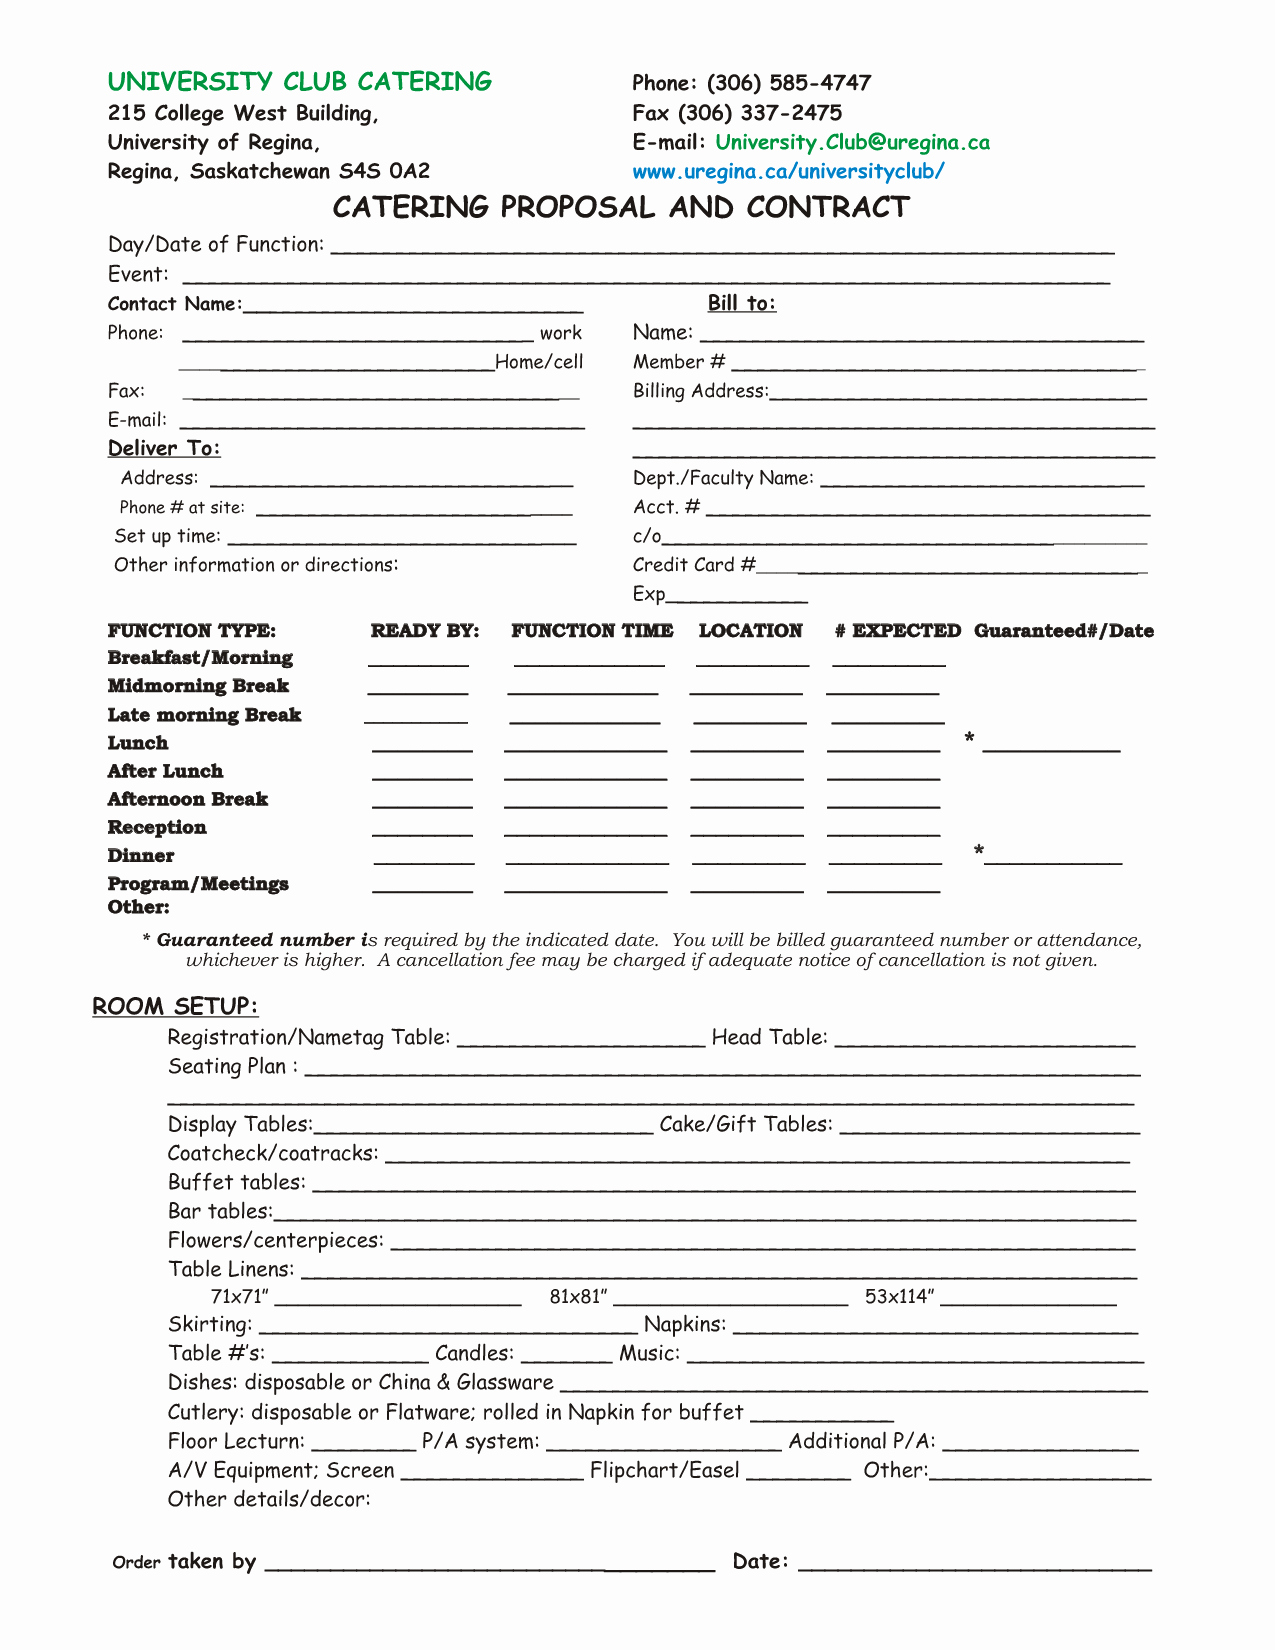 Catering Estimate Template Best Of Catering Proposal